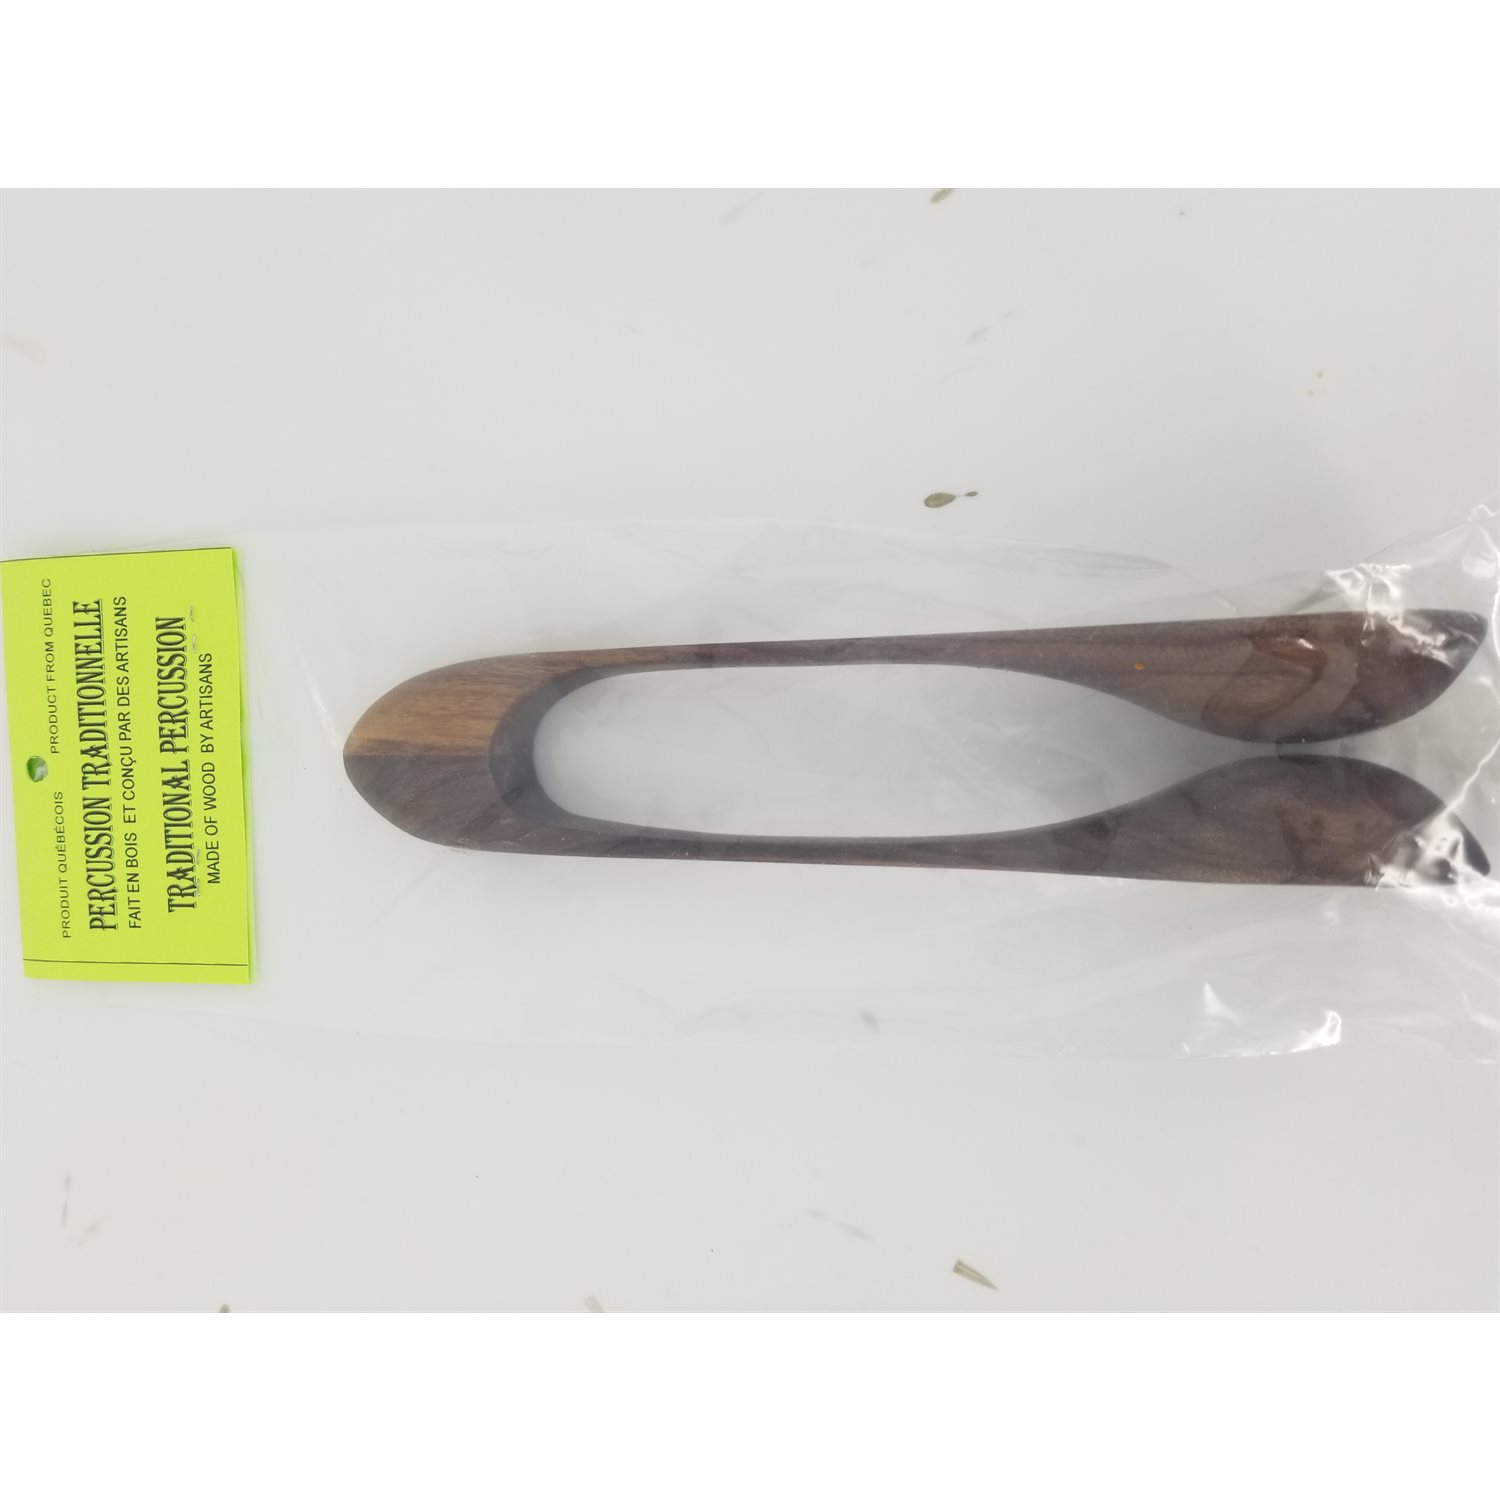 PA CANADA - PA11W - wooden spoons - Long and Large with round tip w / rosewood